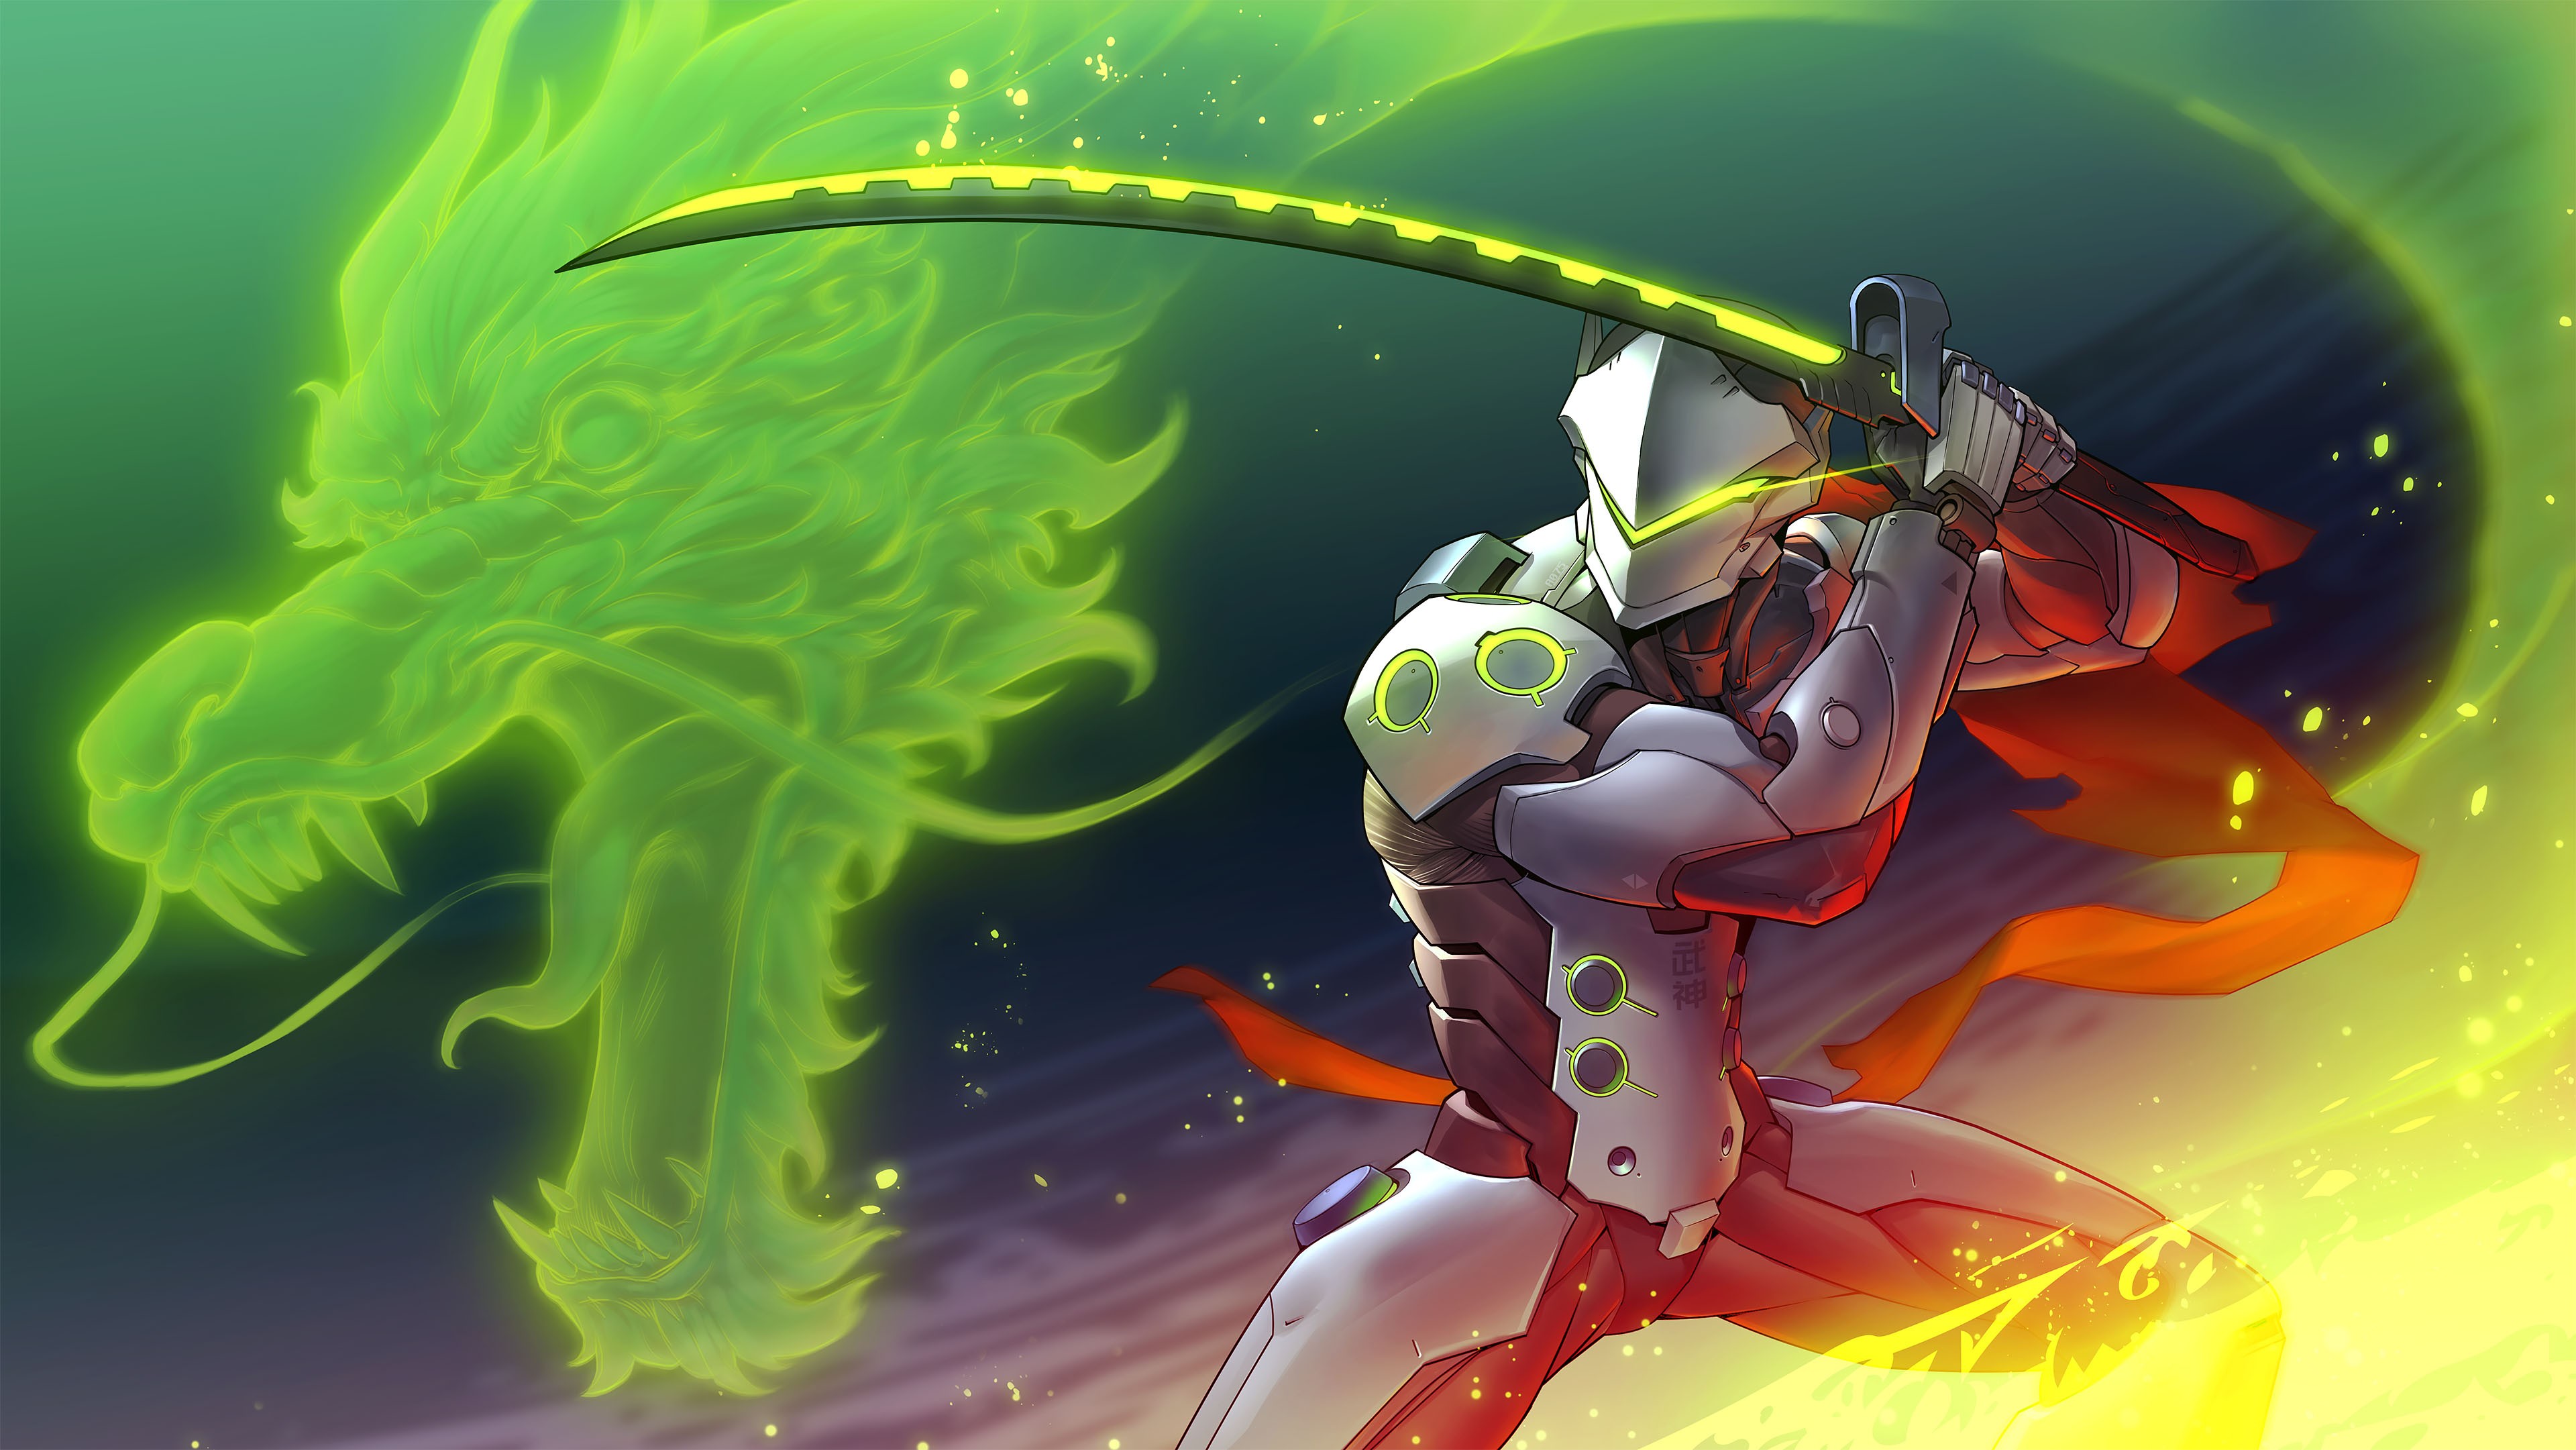 General 3840x2161 Overwatch video games Genji (Overwatch) PC gaming sword weapon video game characters